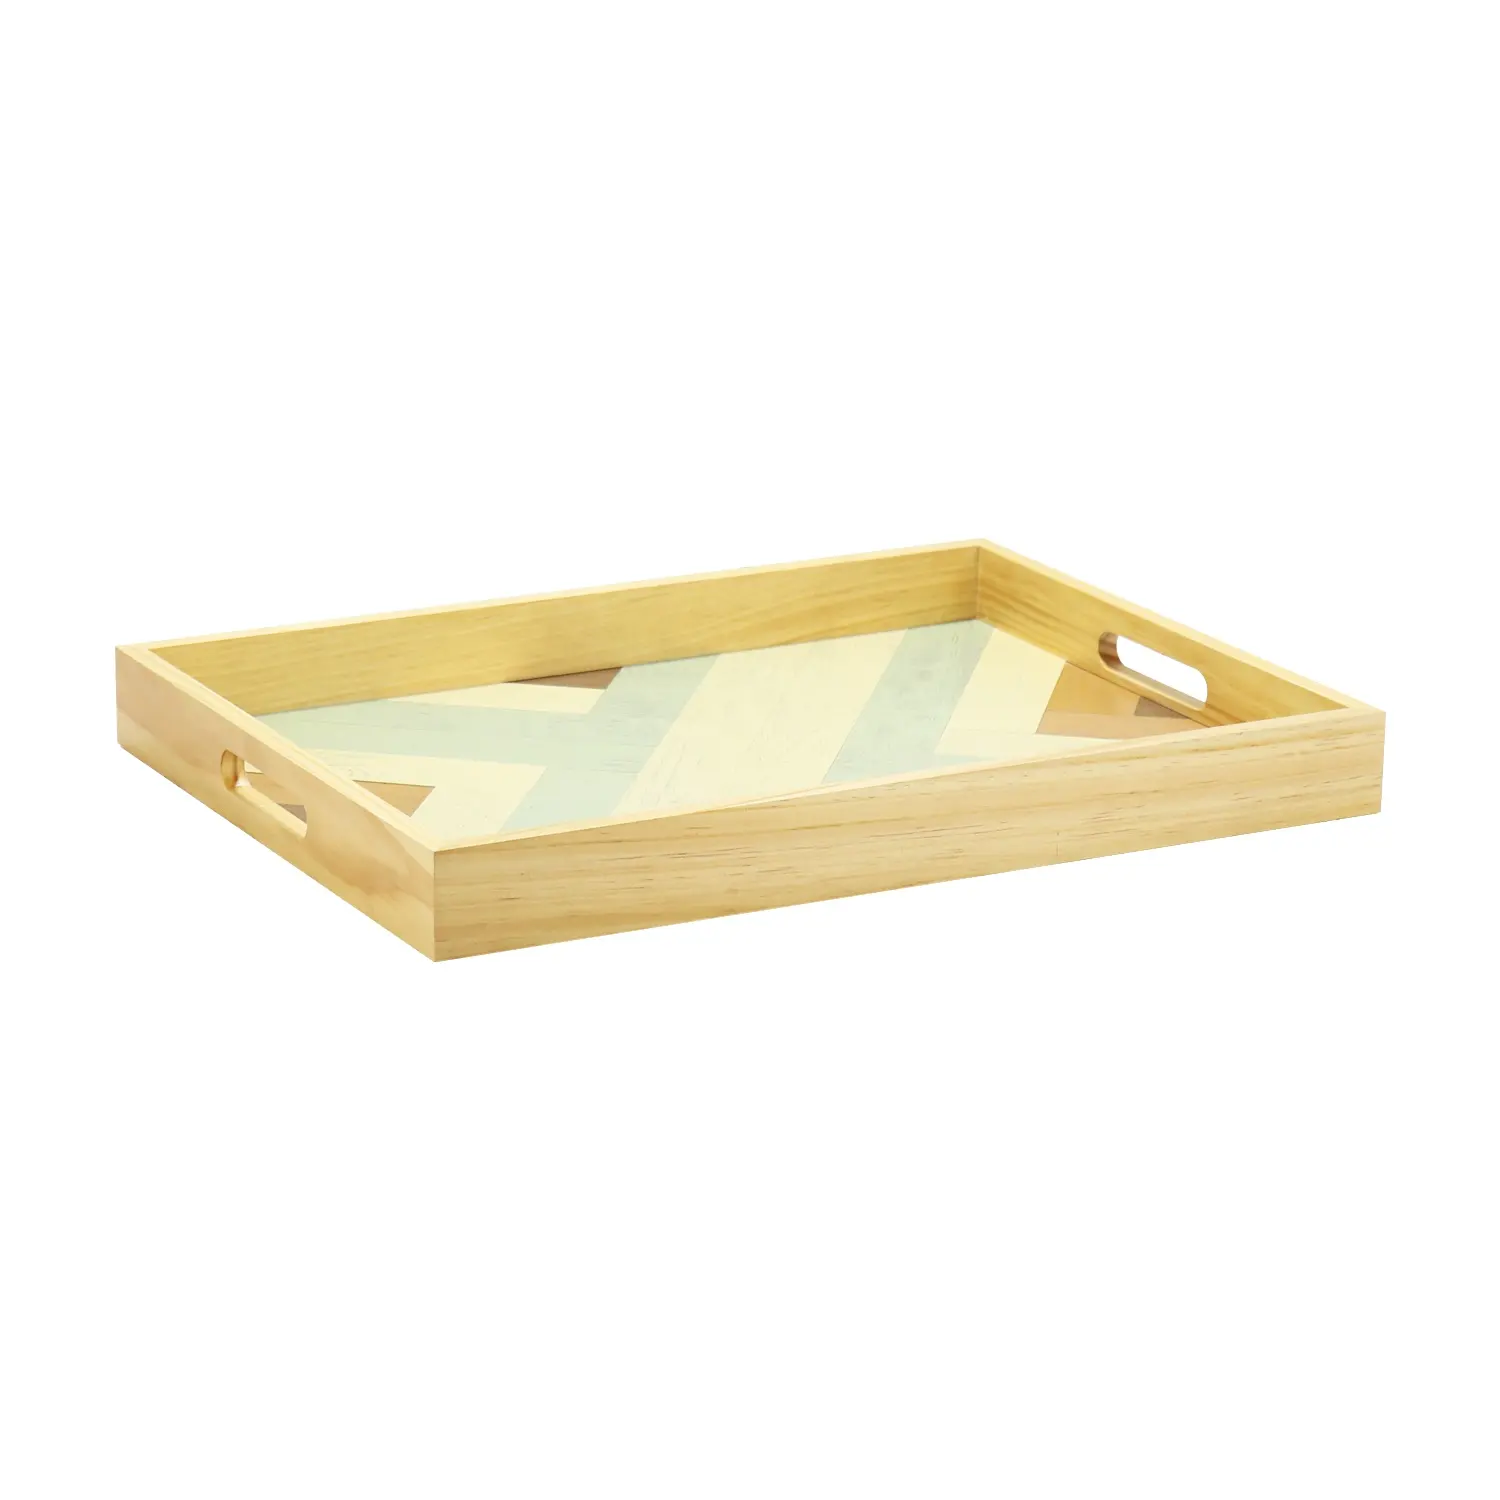 wooden trays provide large for tea and coffee wooden Serving Trays with Metal Handles